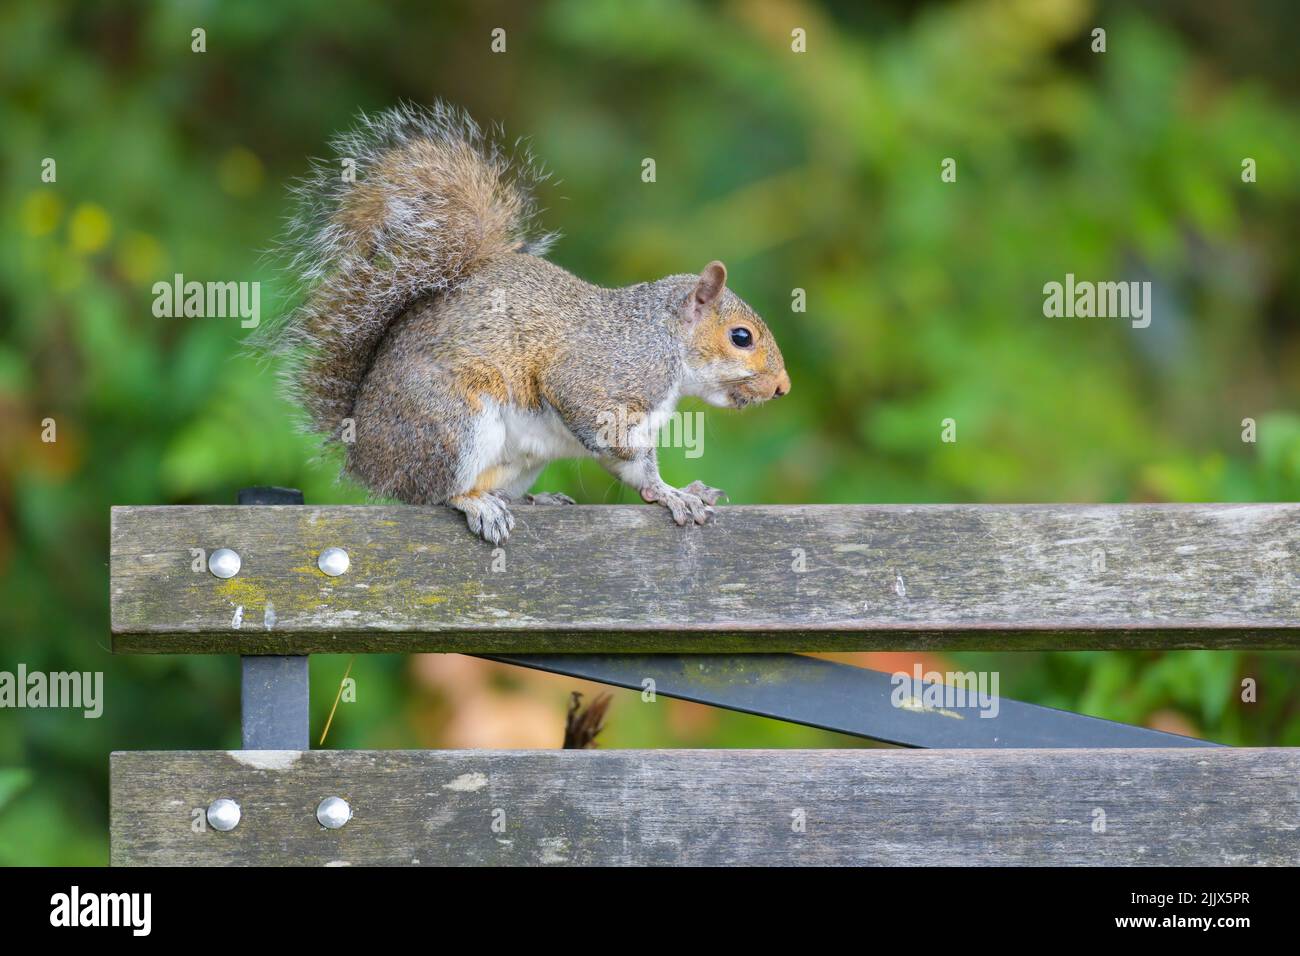 Squirrel balancing on the top of a rail on a park bench seat with green foliage in the out of focus background Stock Photo